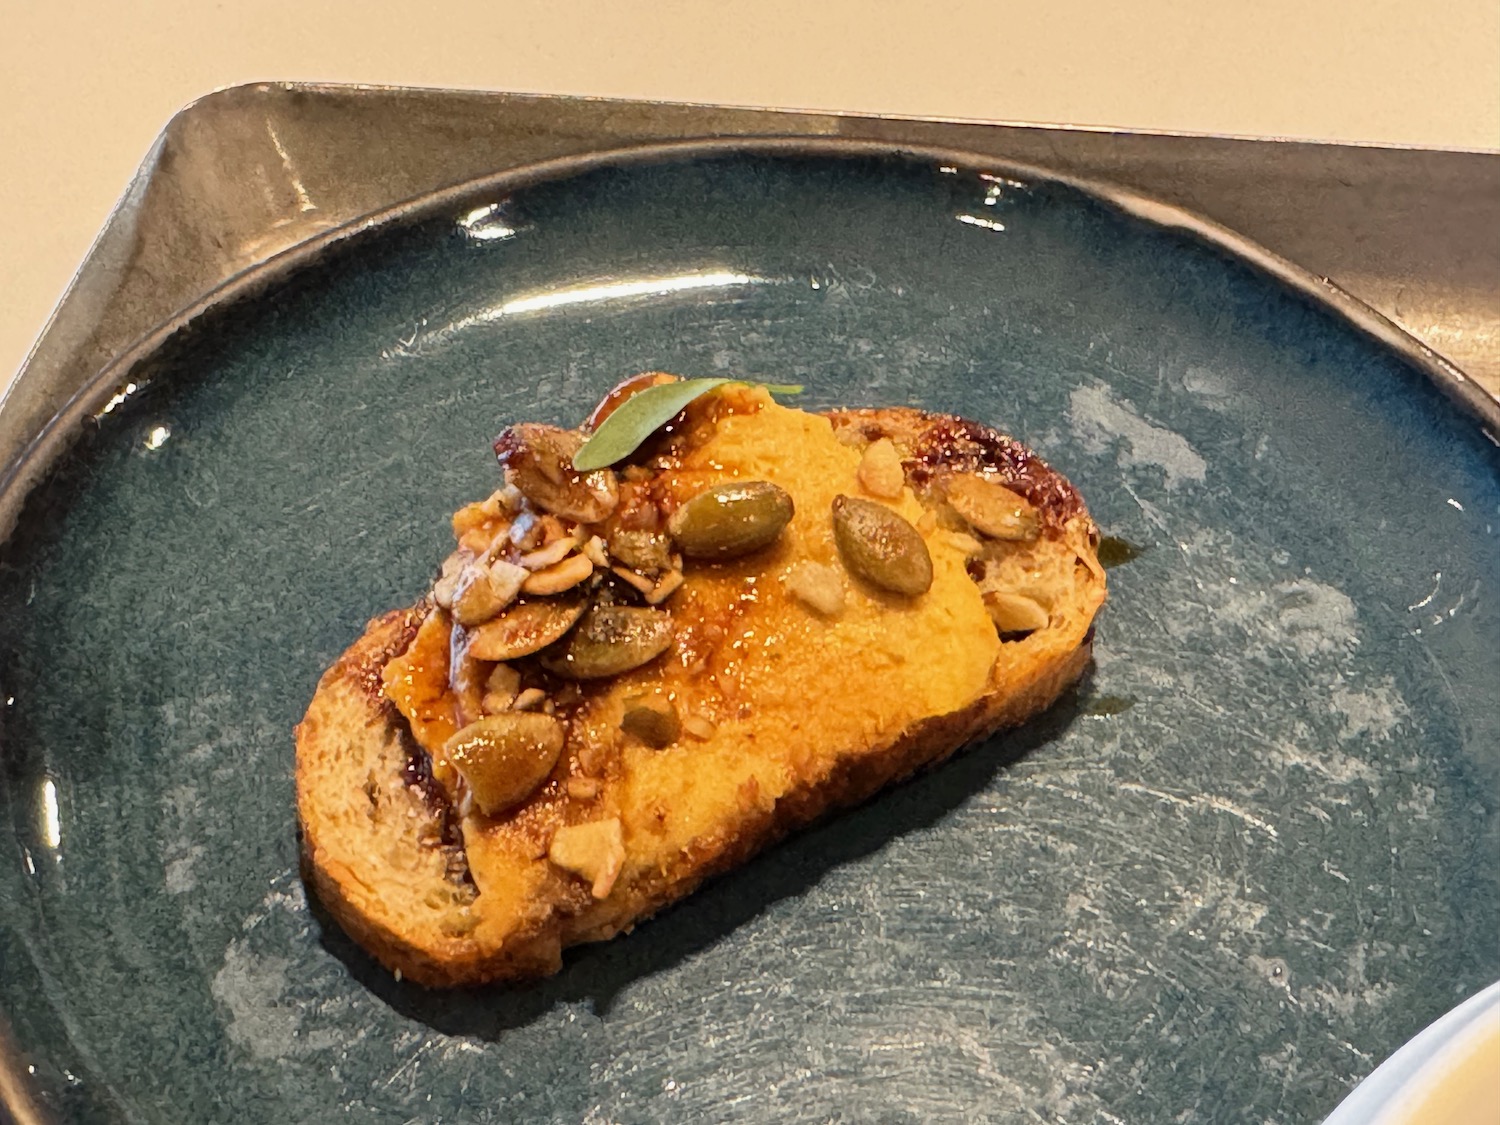 a piece of toast with peanut butter and seeds on a blue plate